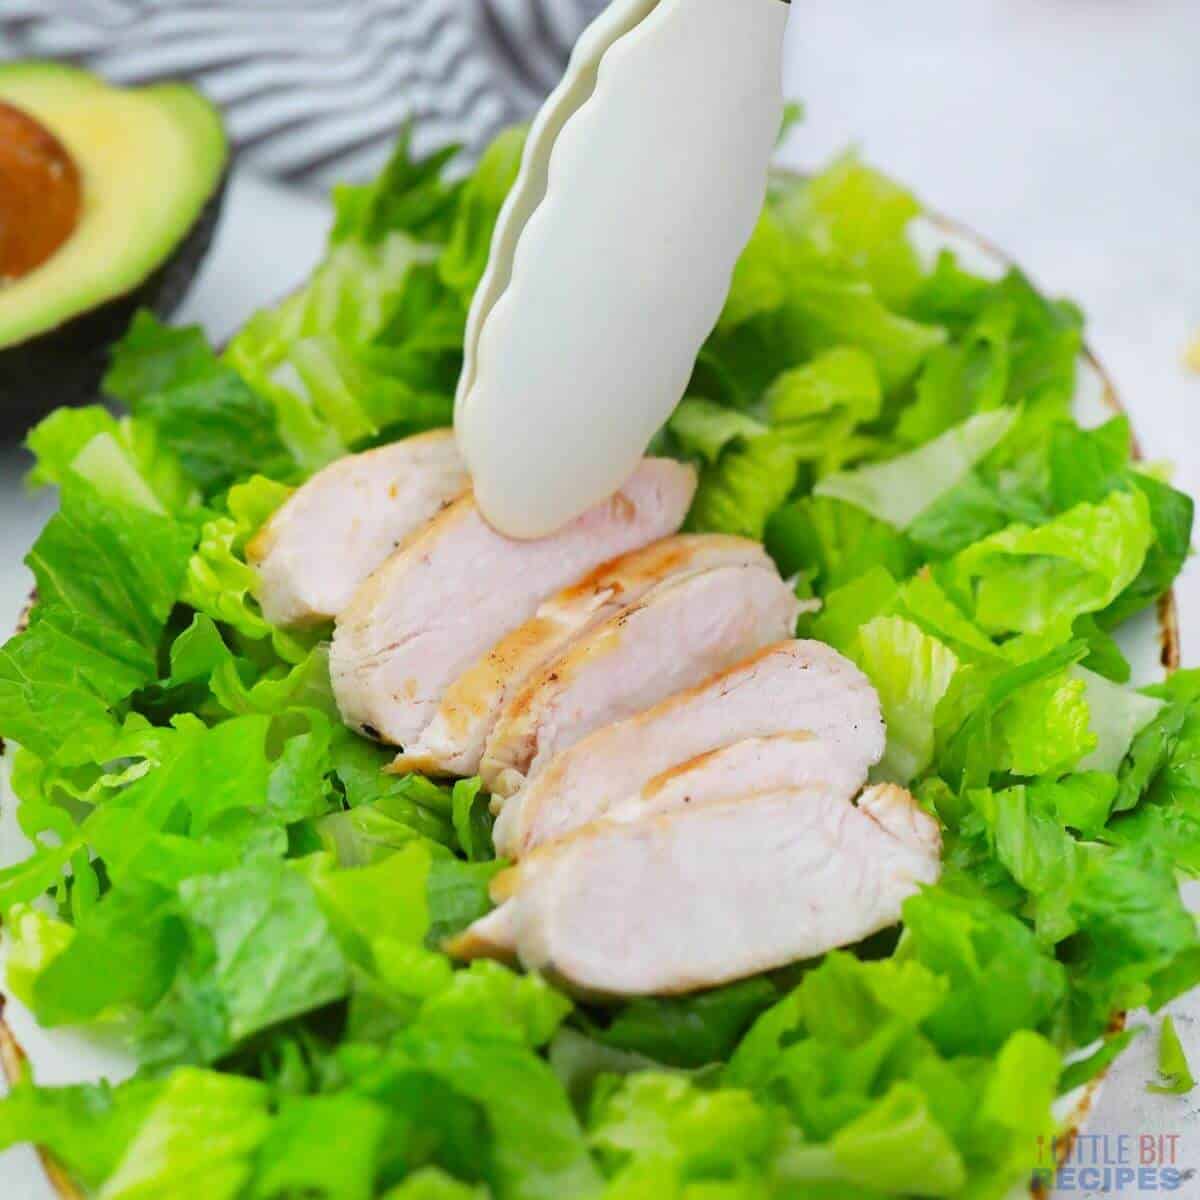 topping lettuce with chicken slices.